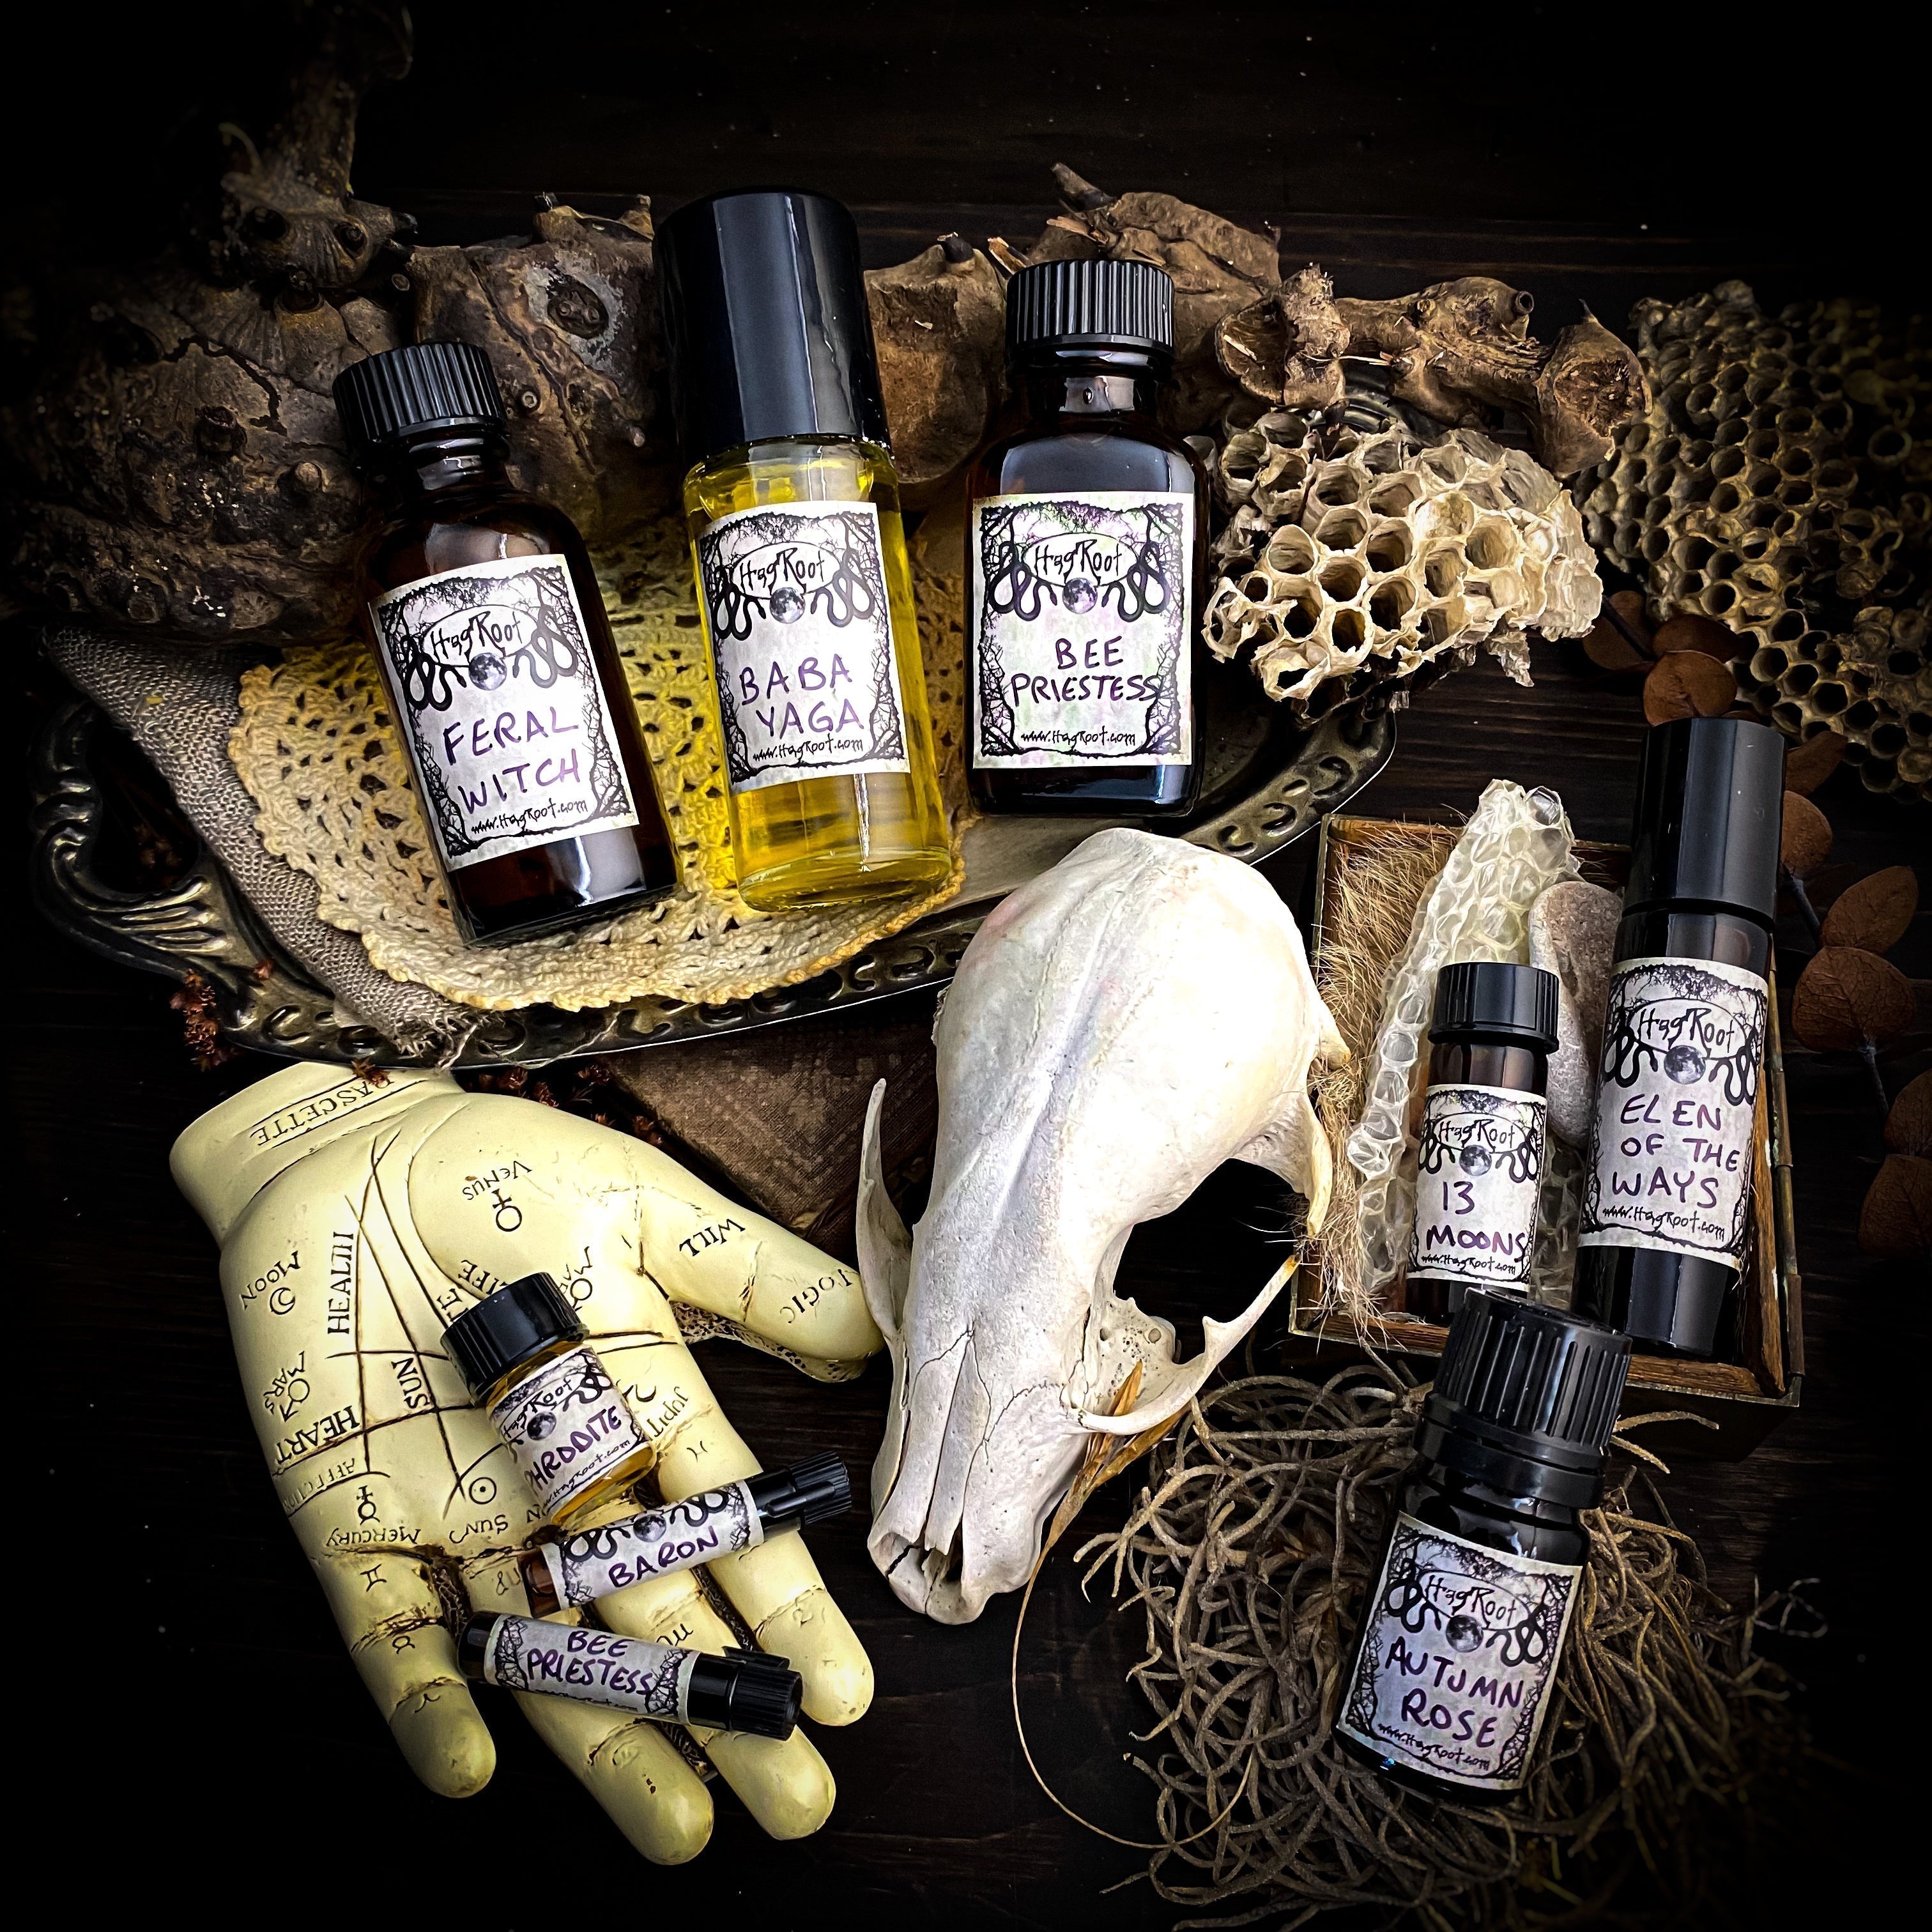 HEDGE WITCH-(Wild Growing Gardens, Abundant Green Hedges, Sweet Grass)-Perfume, Cologne, Anointing, Ritual Oil